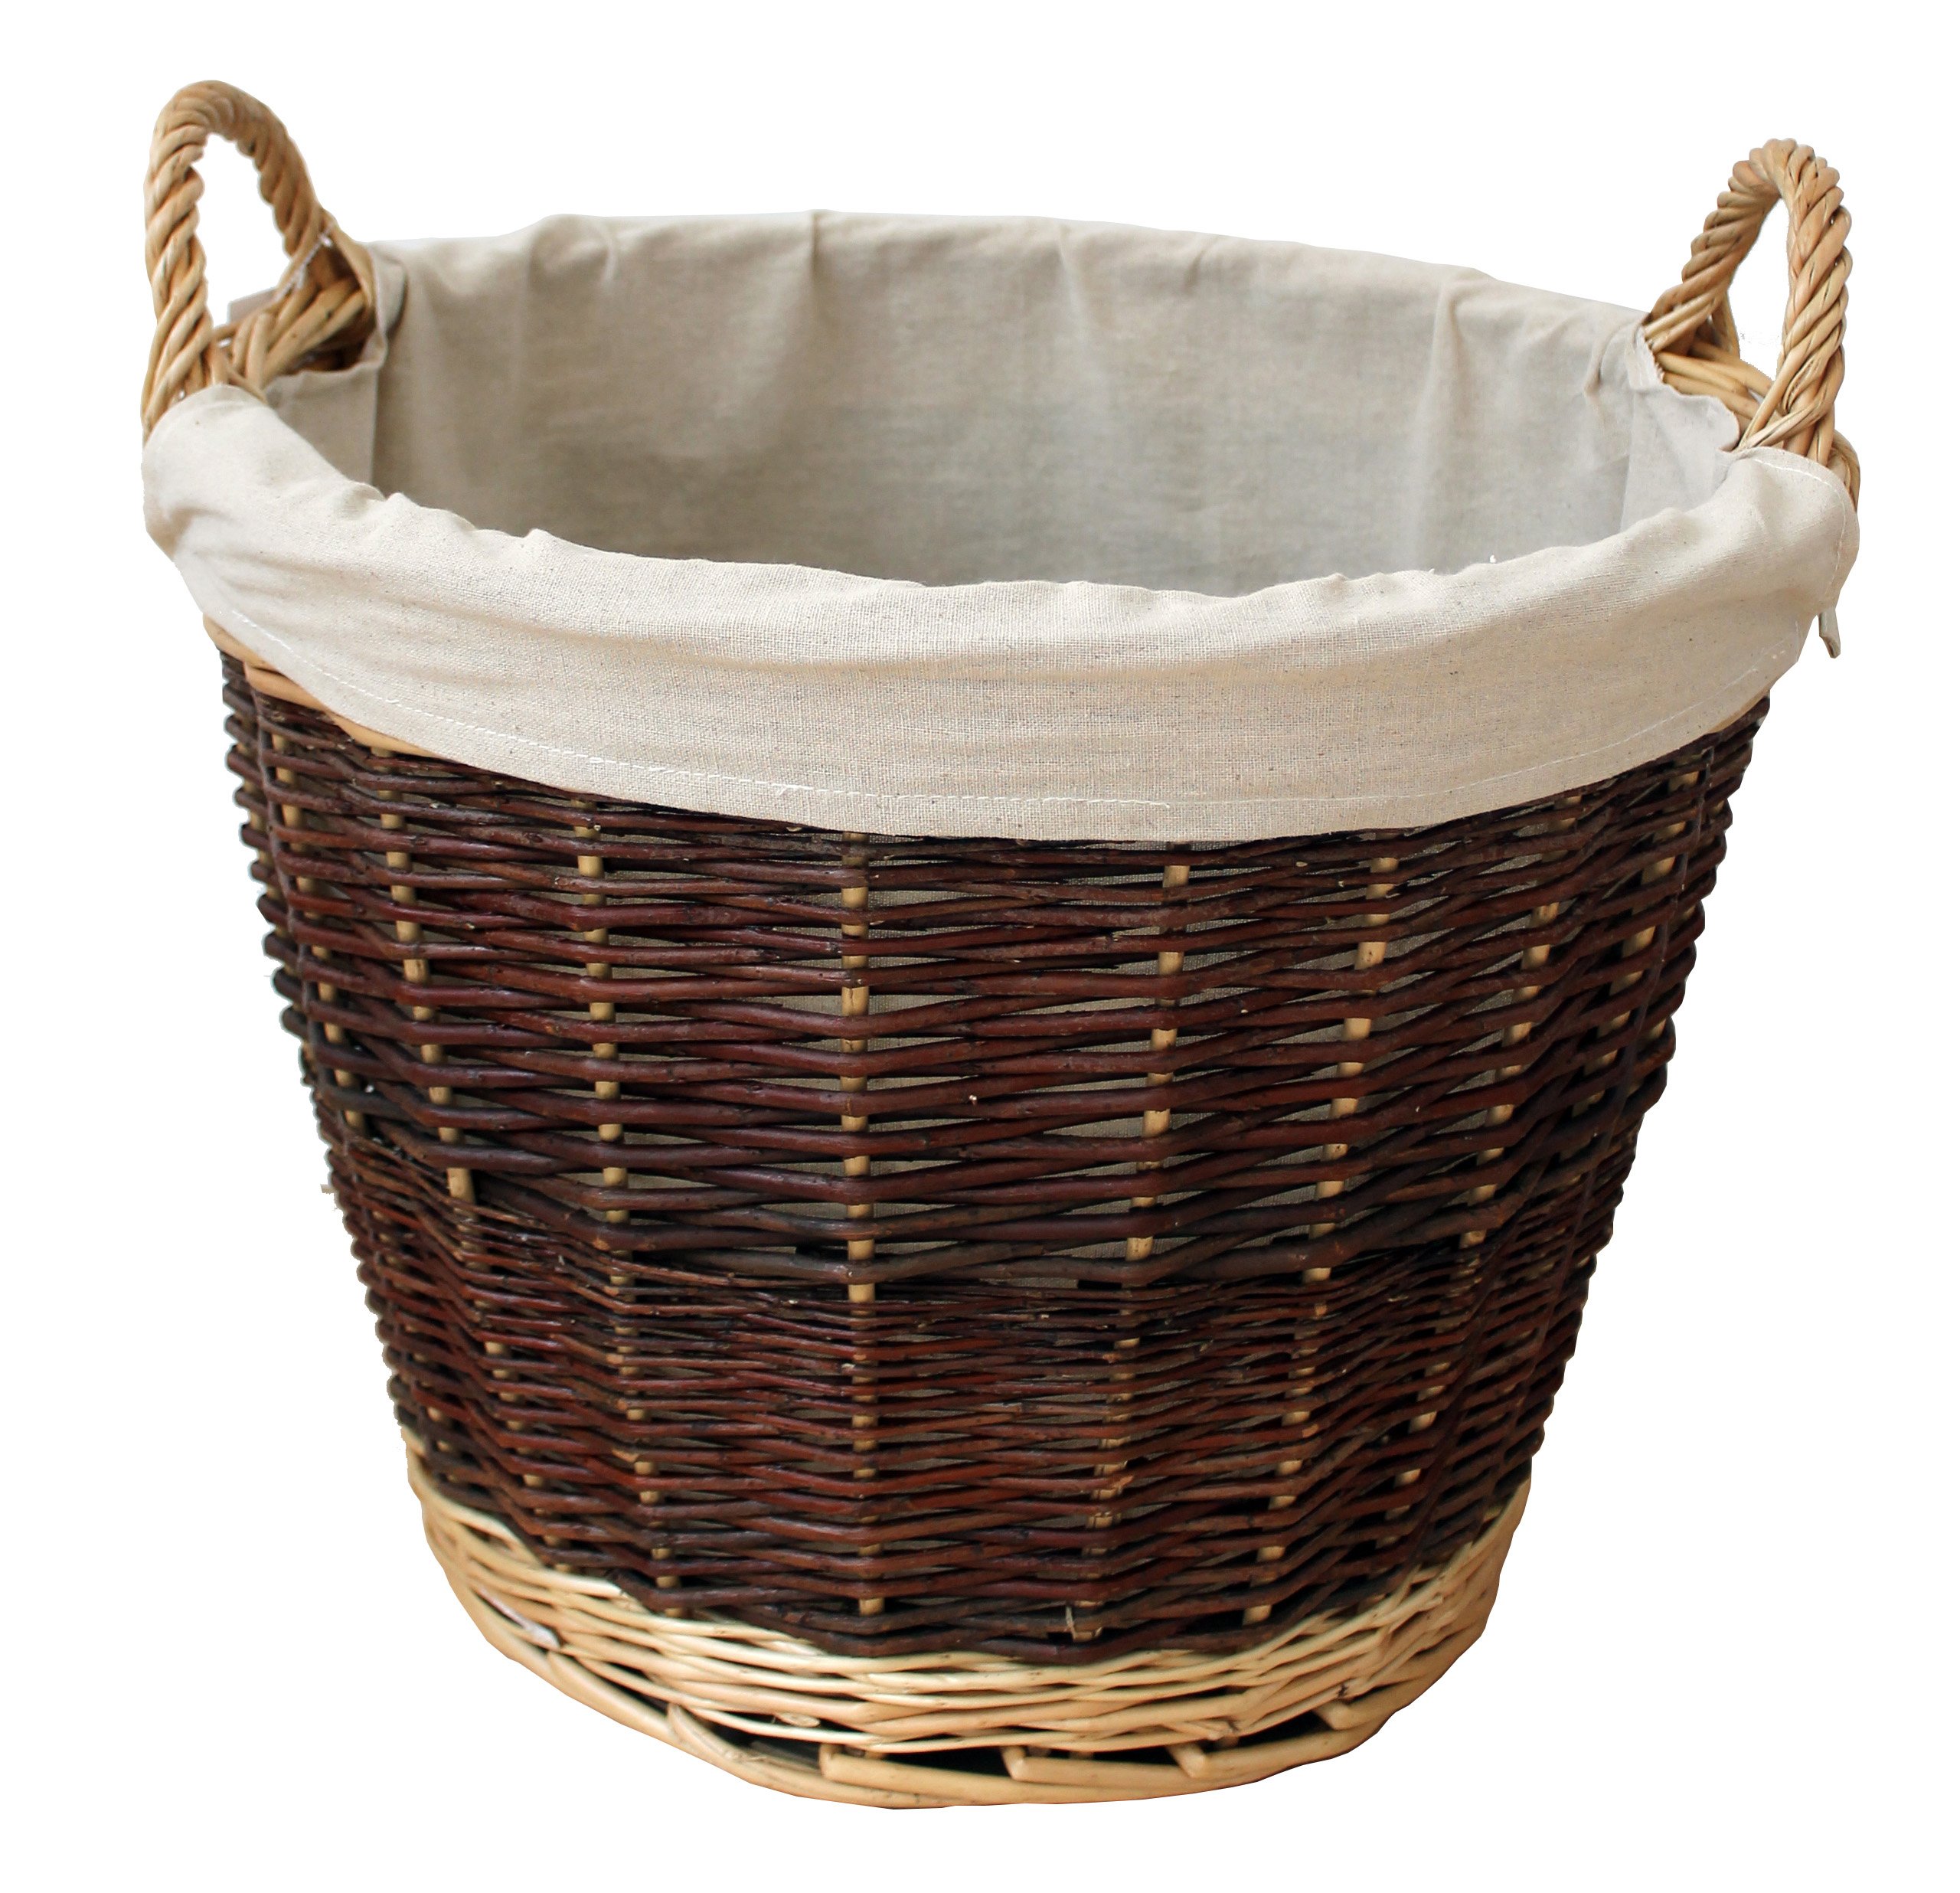 Large Round Wicker Basket With Jute Liner